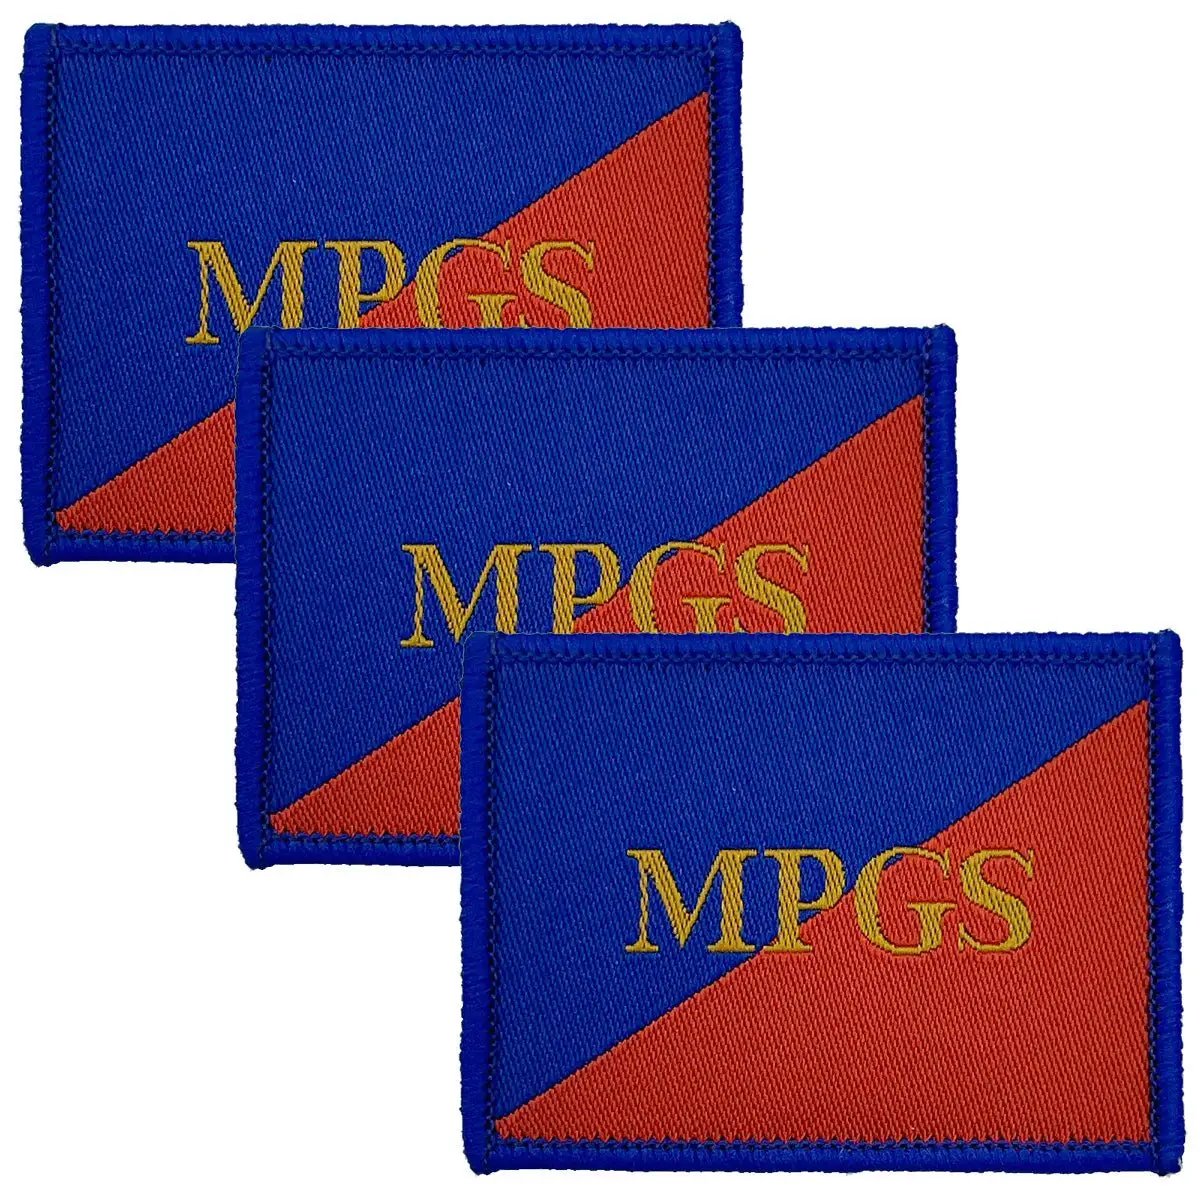 Military Provost MPGS TRF - Iron Sewn On Patch - John Bull Clothing